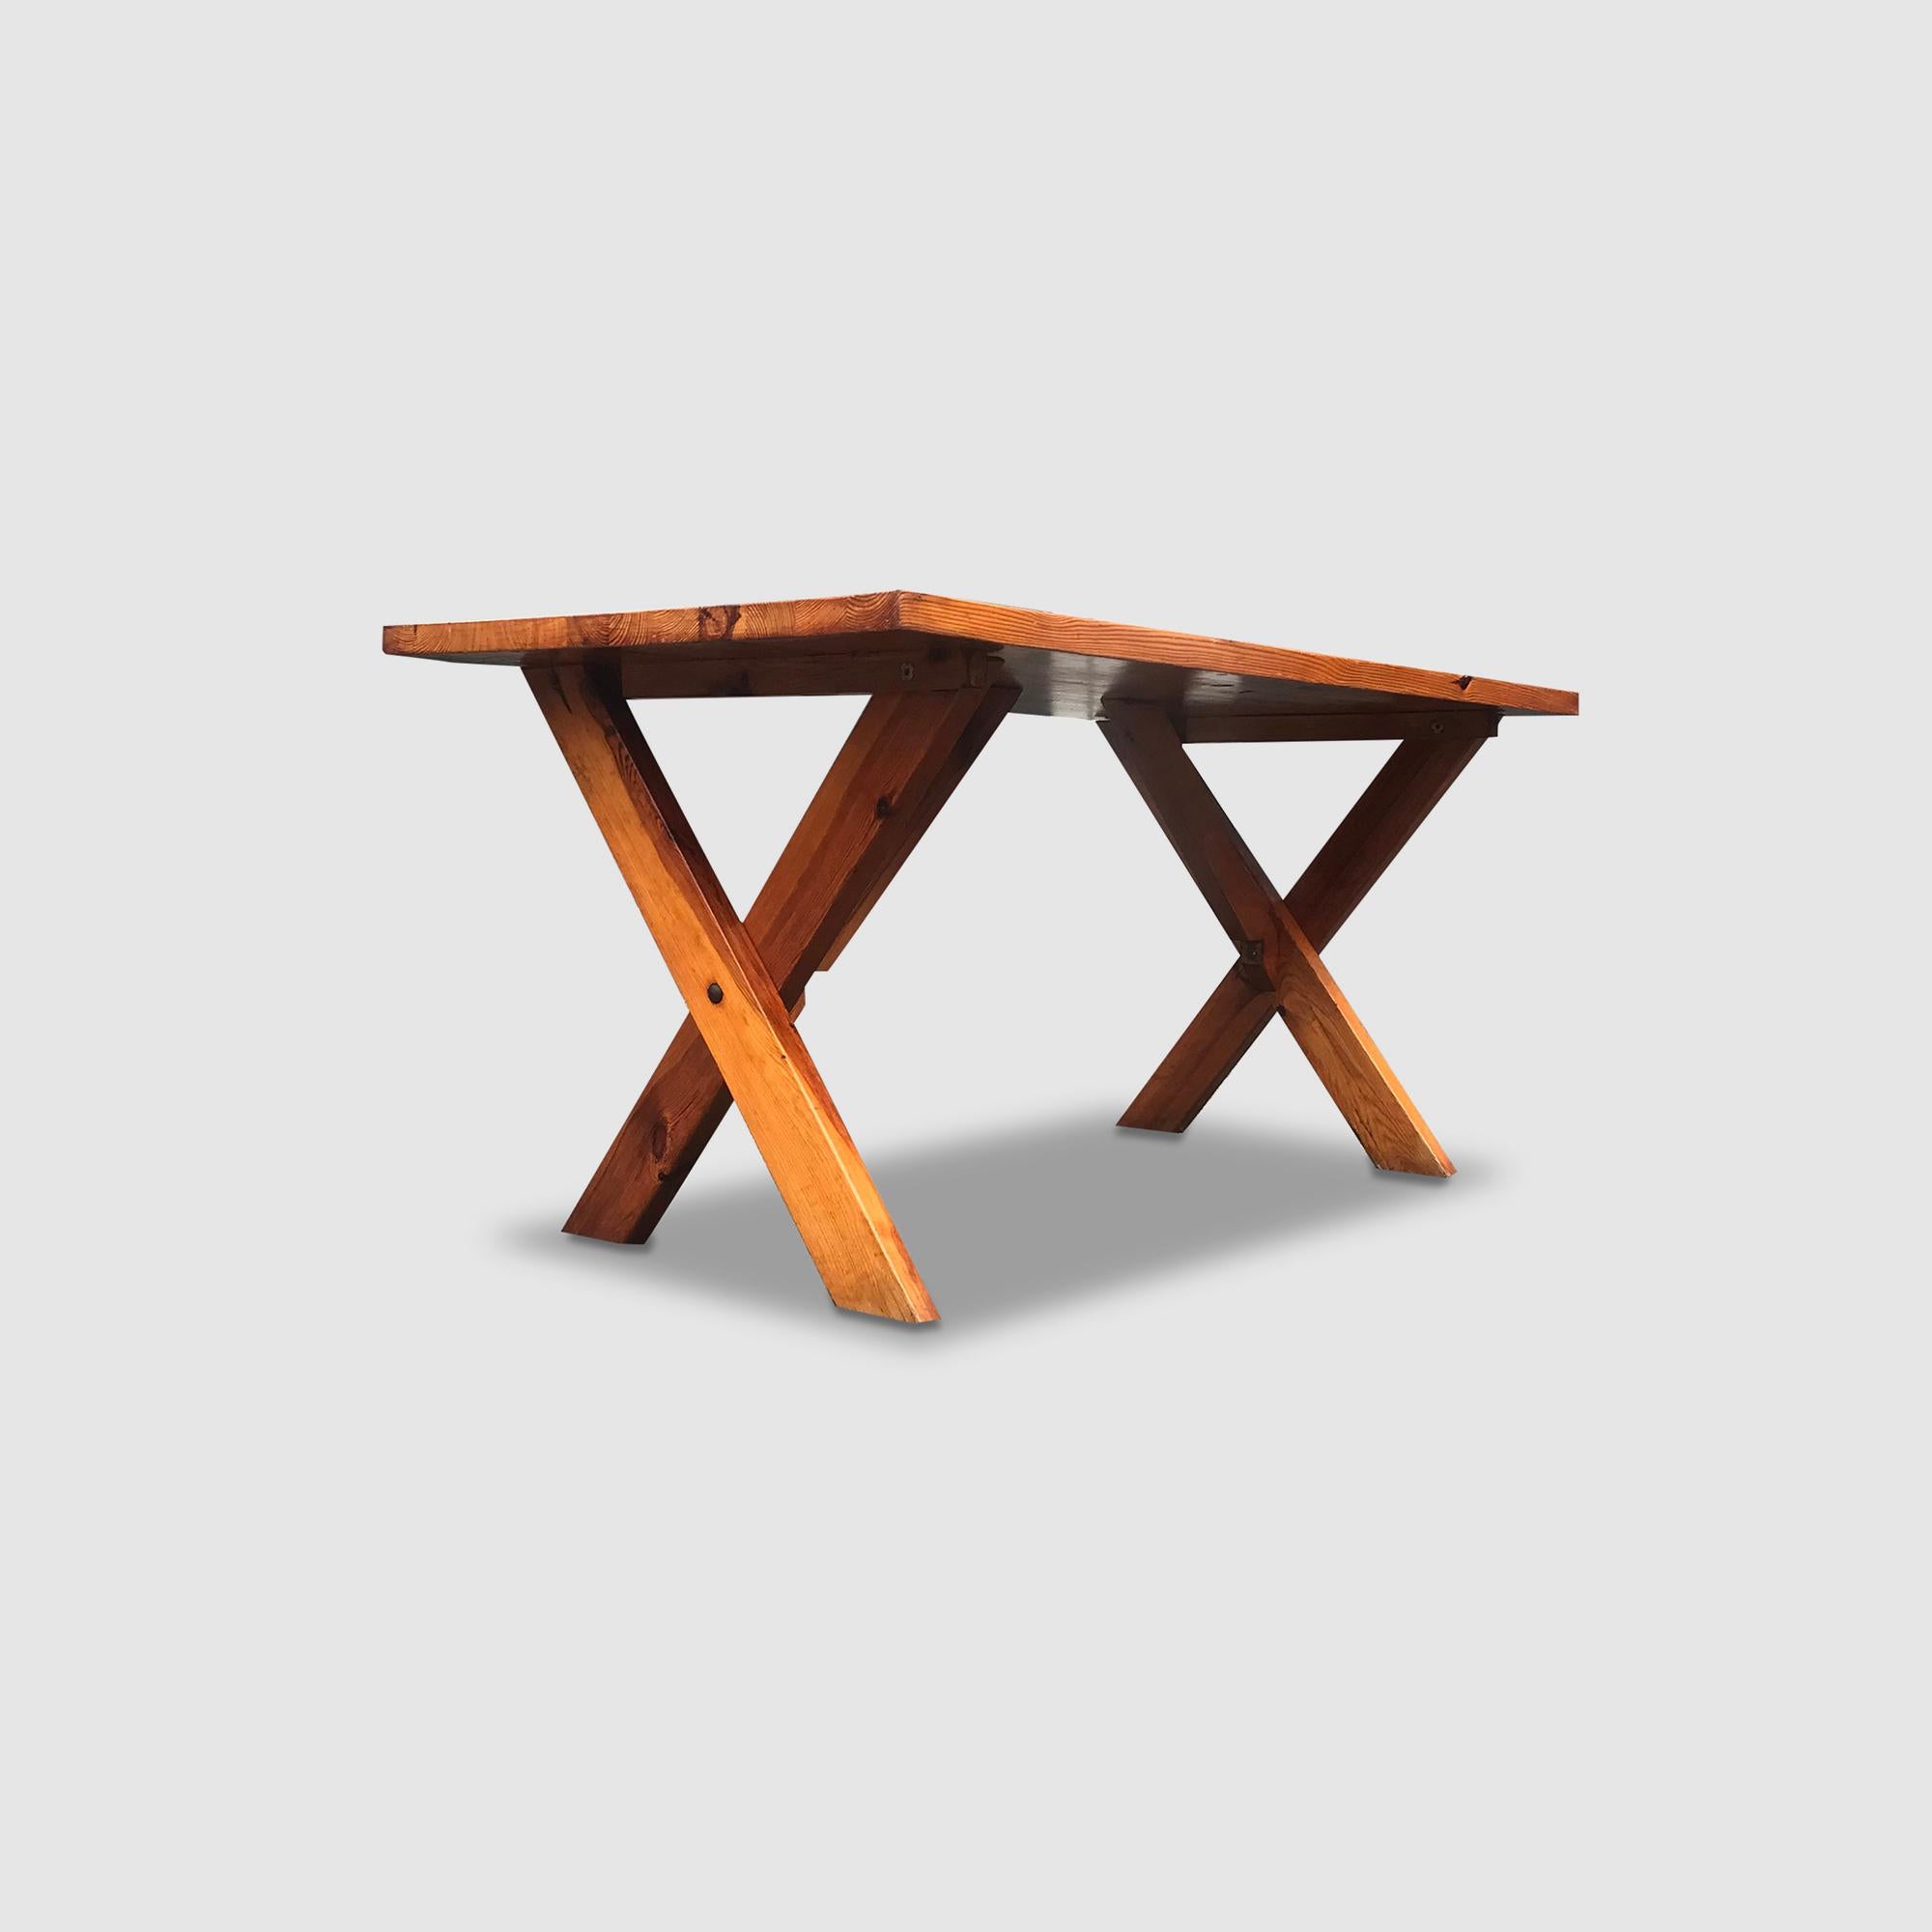 Solid pine wood dining table, with beautiful X-base construction, produced by Ate van Apeldoorn for Houtwerk Hattem. 

The X-base is supported by a solid beam tilted in a 45 degree angle.

In typical Van Apeldoorn fashion; built solid and with